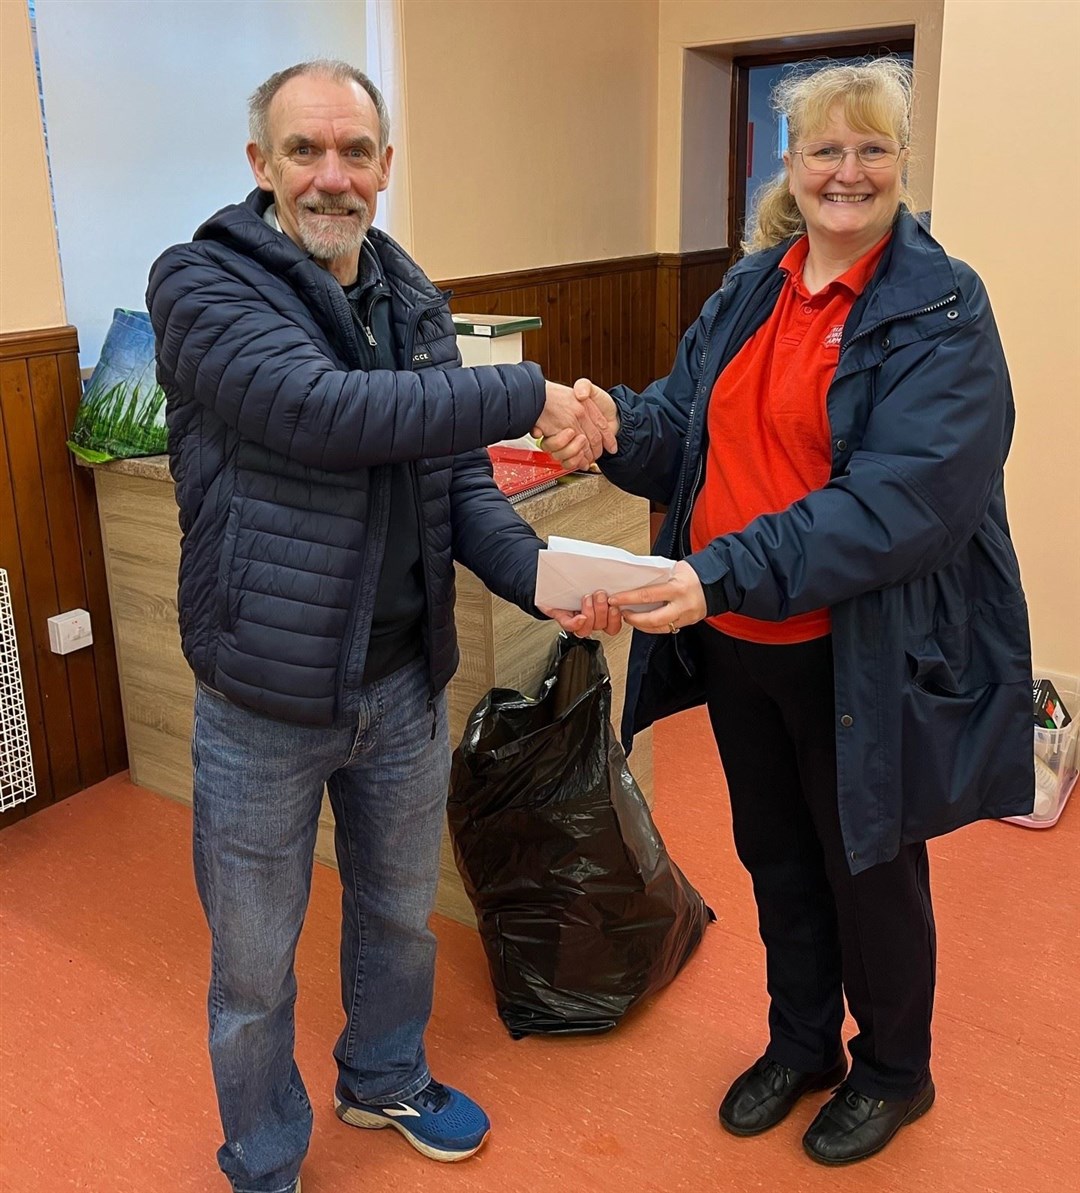 Race organiser hands over a donation of £502 to Lieutenant Theresa Raffan for Buckie Salvation Army food larder. Picture Sair Heidie race